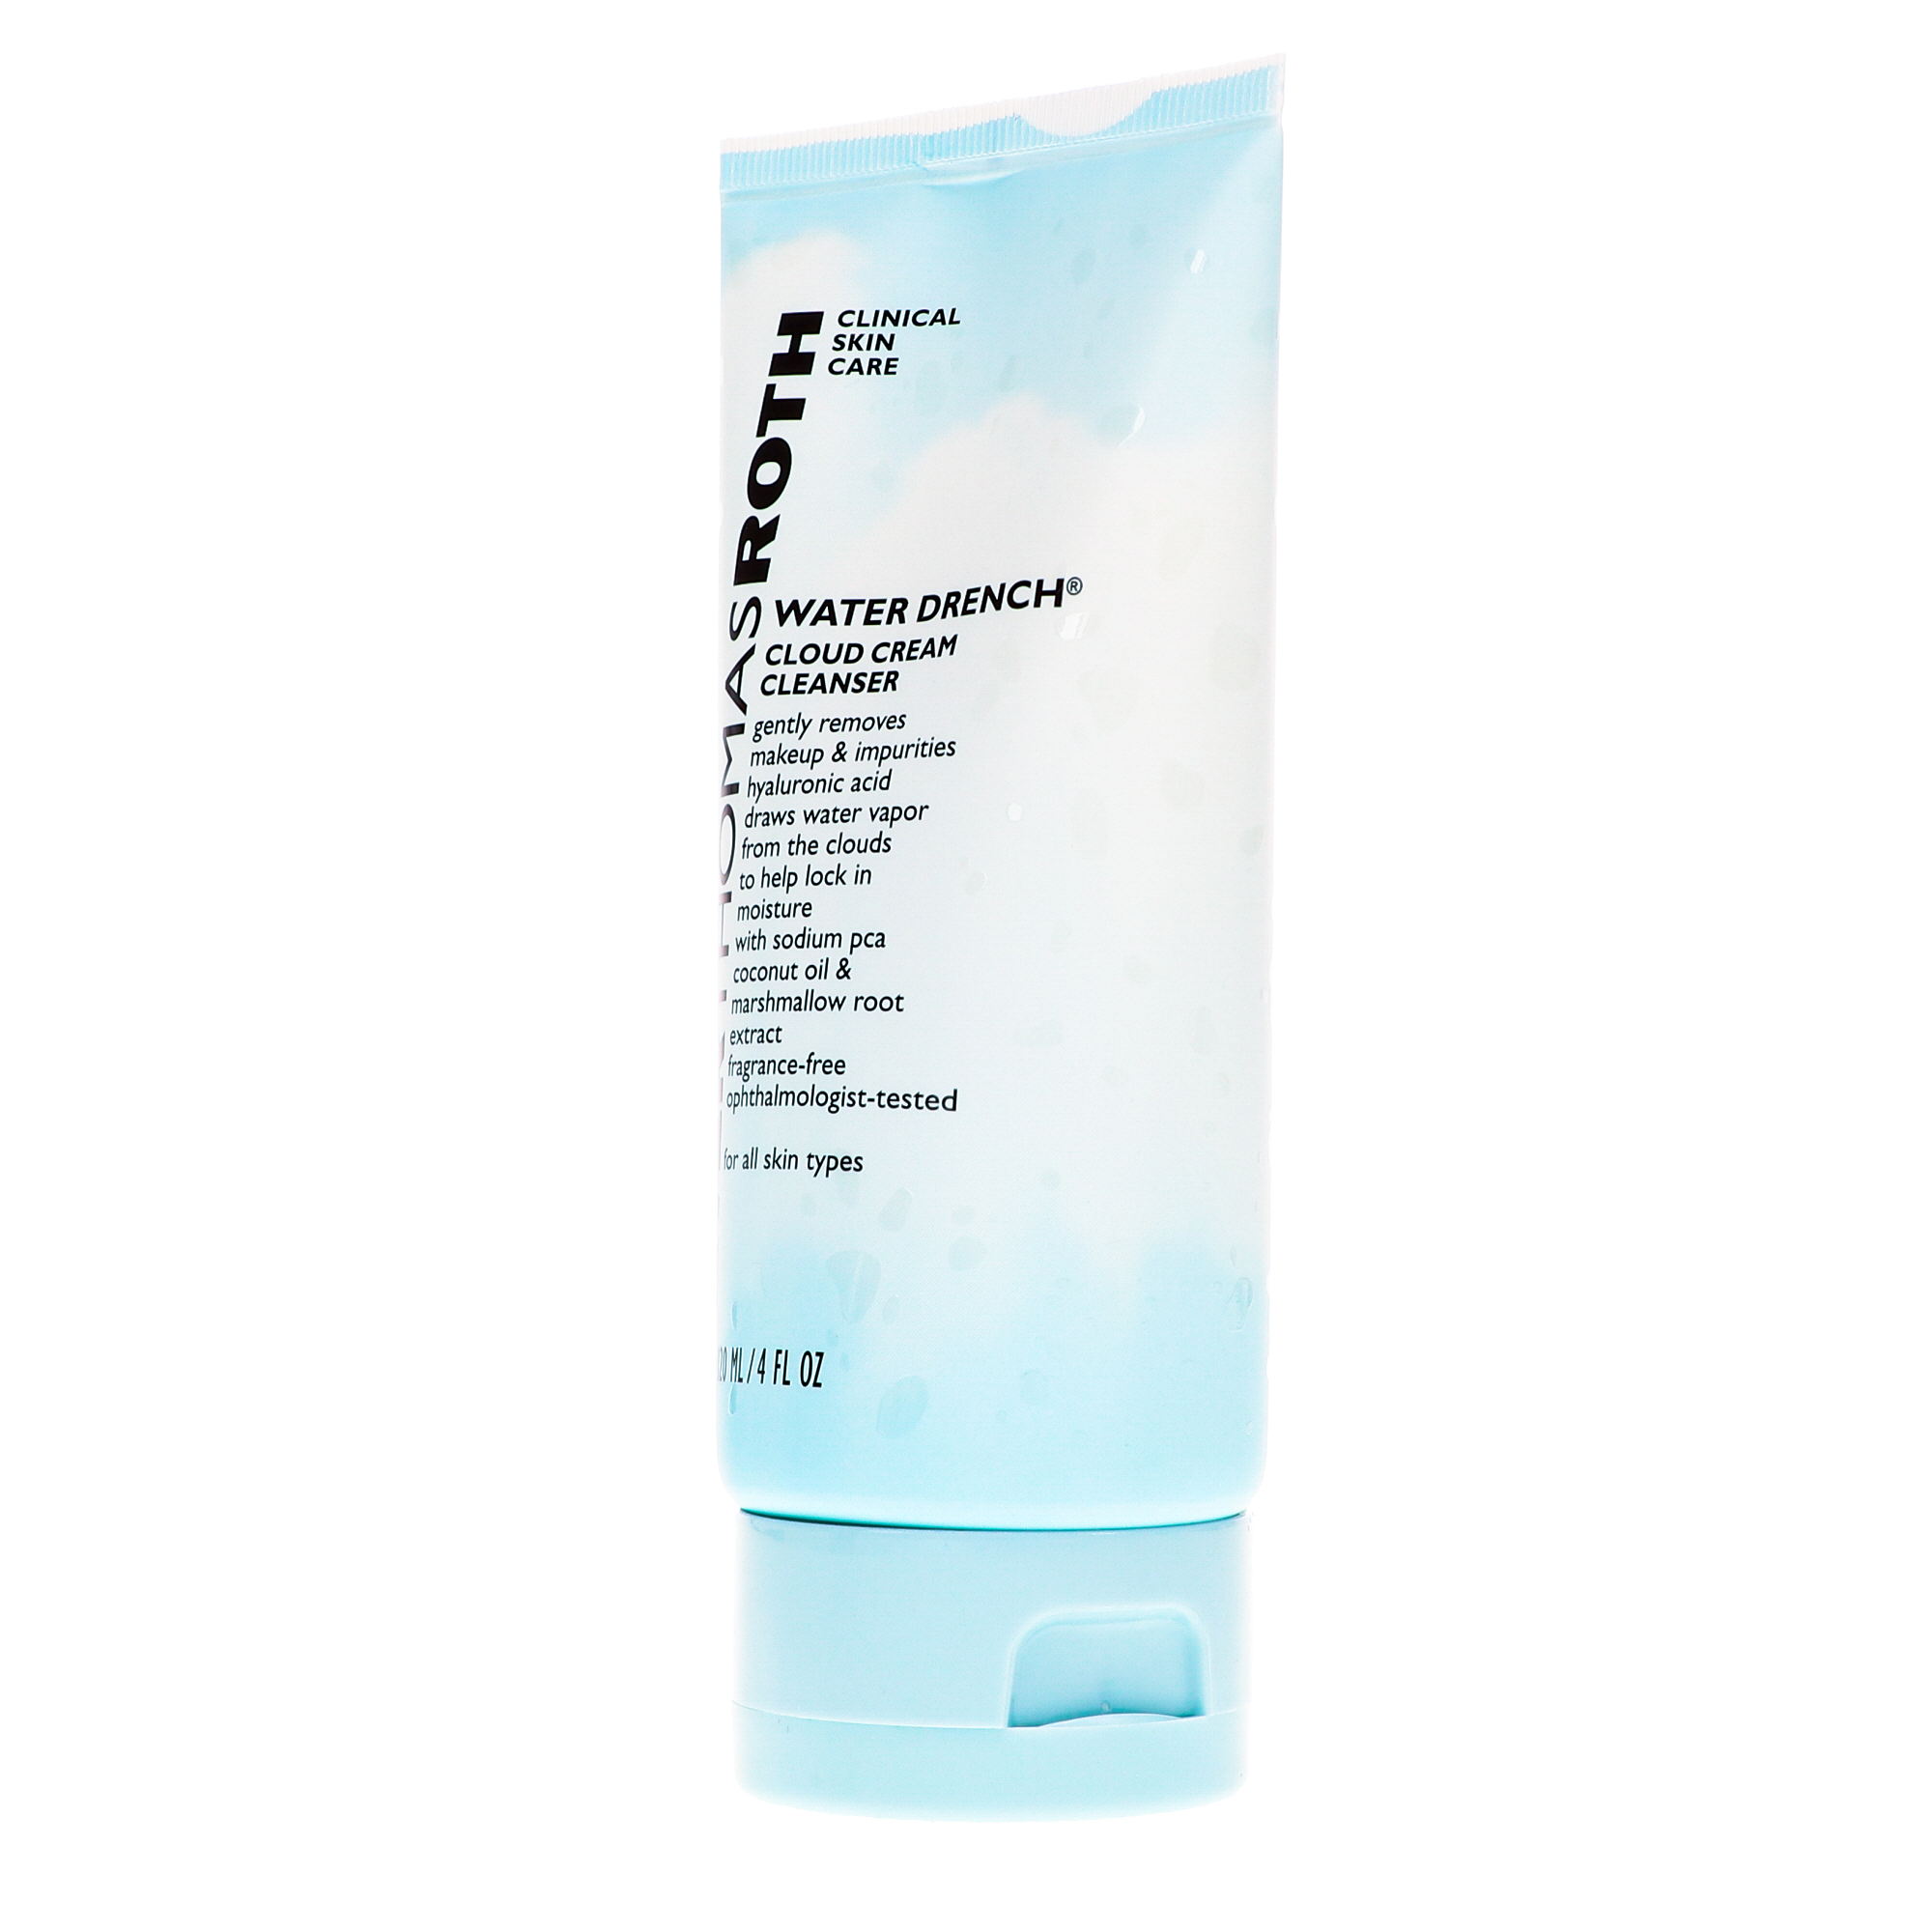 Peter Thomas Roth Water Drench Cleanser 4 oz - image 5 of 7